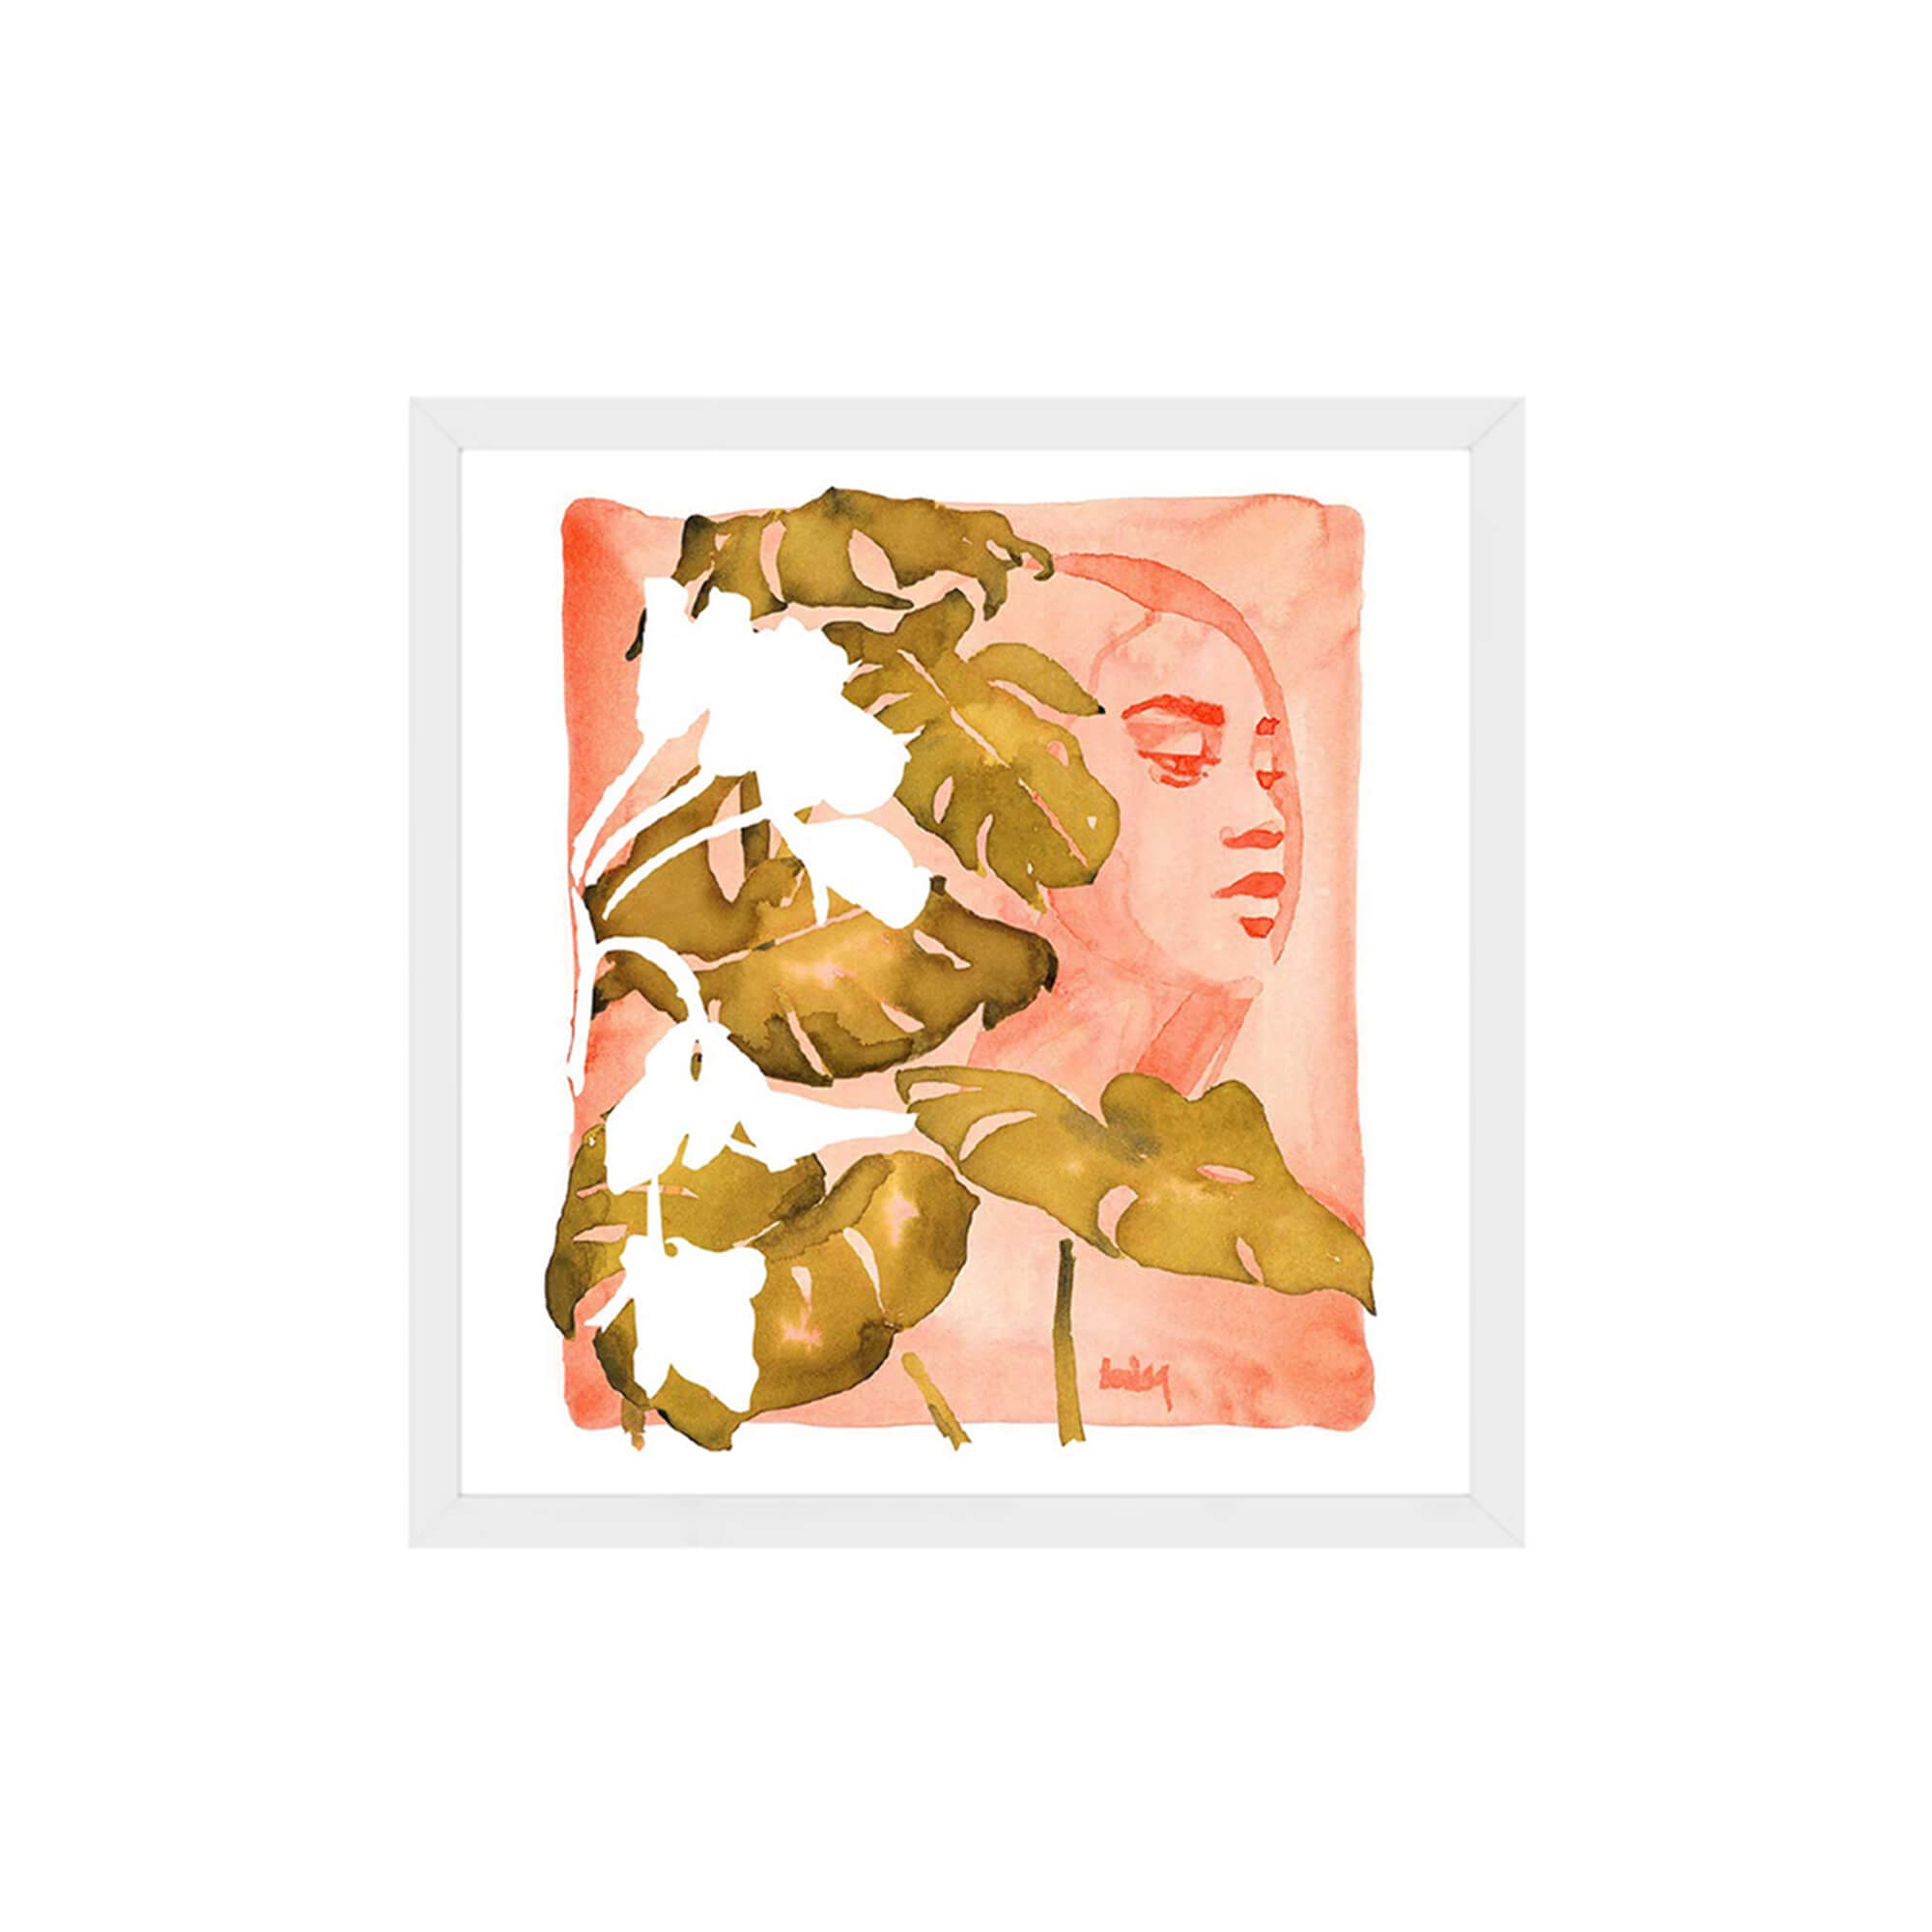 Framed paper giclée print of a watercolor artwork featuring a woman's portrait and some monstera leaves by Hawaii artist Lovisa Oliv